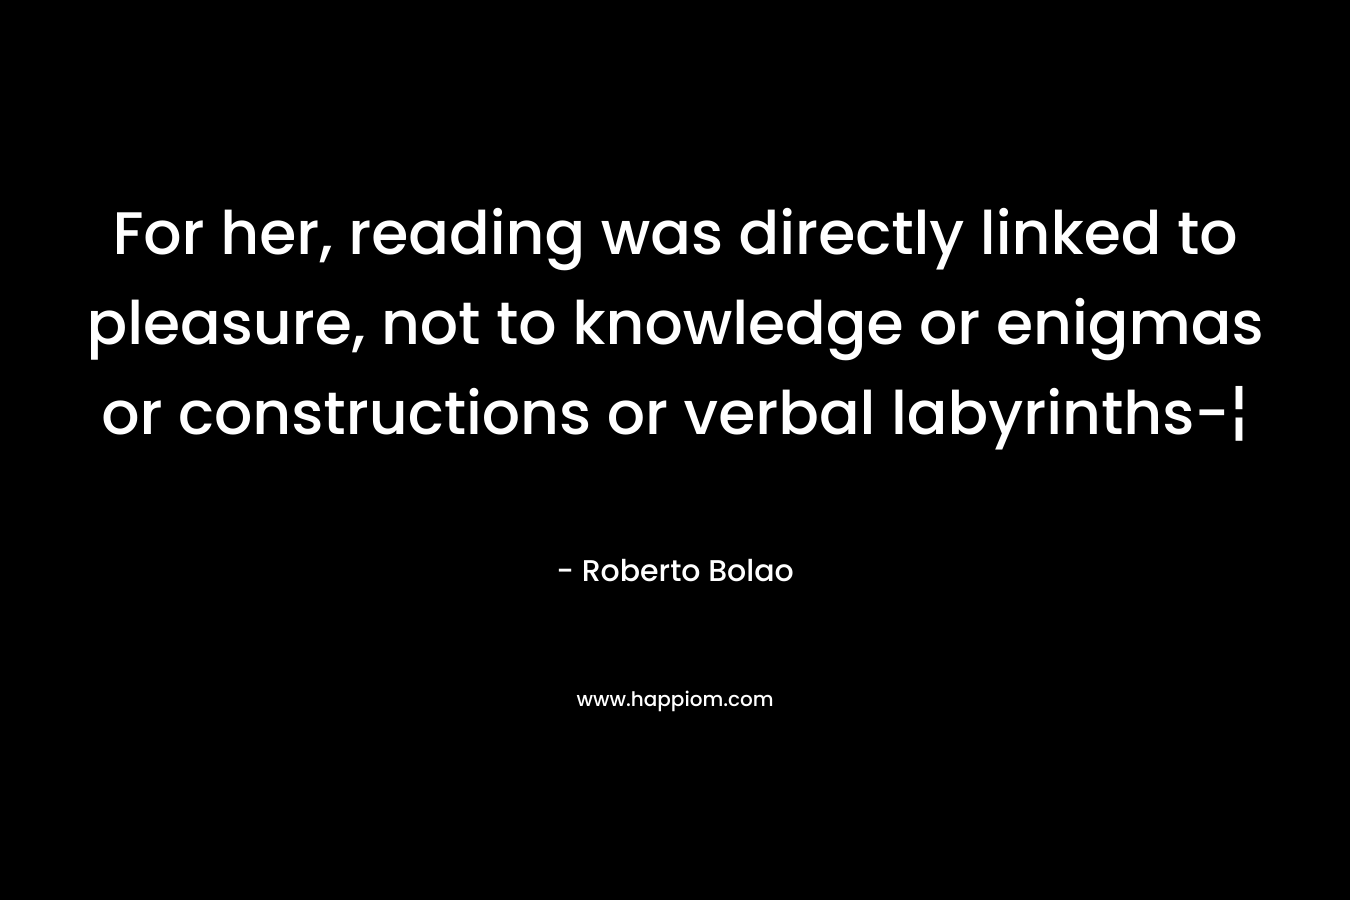 For her, reading was directly linked to pleasure, not to knowledge or enigmas or constructions or verbal labyrinths-¦